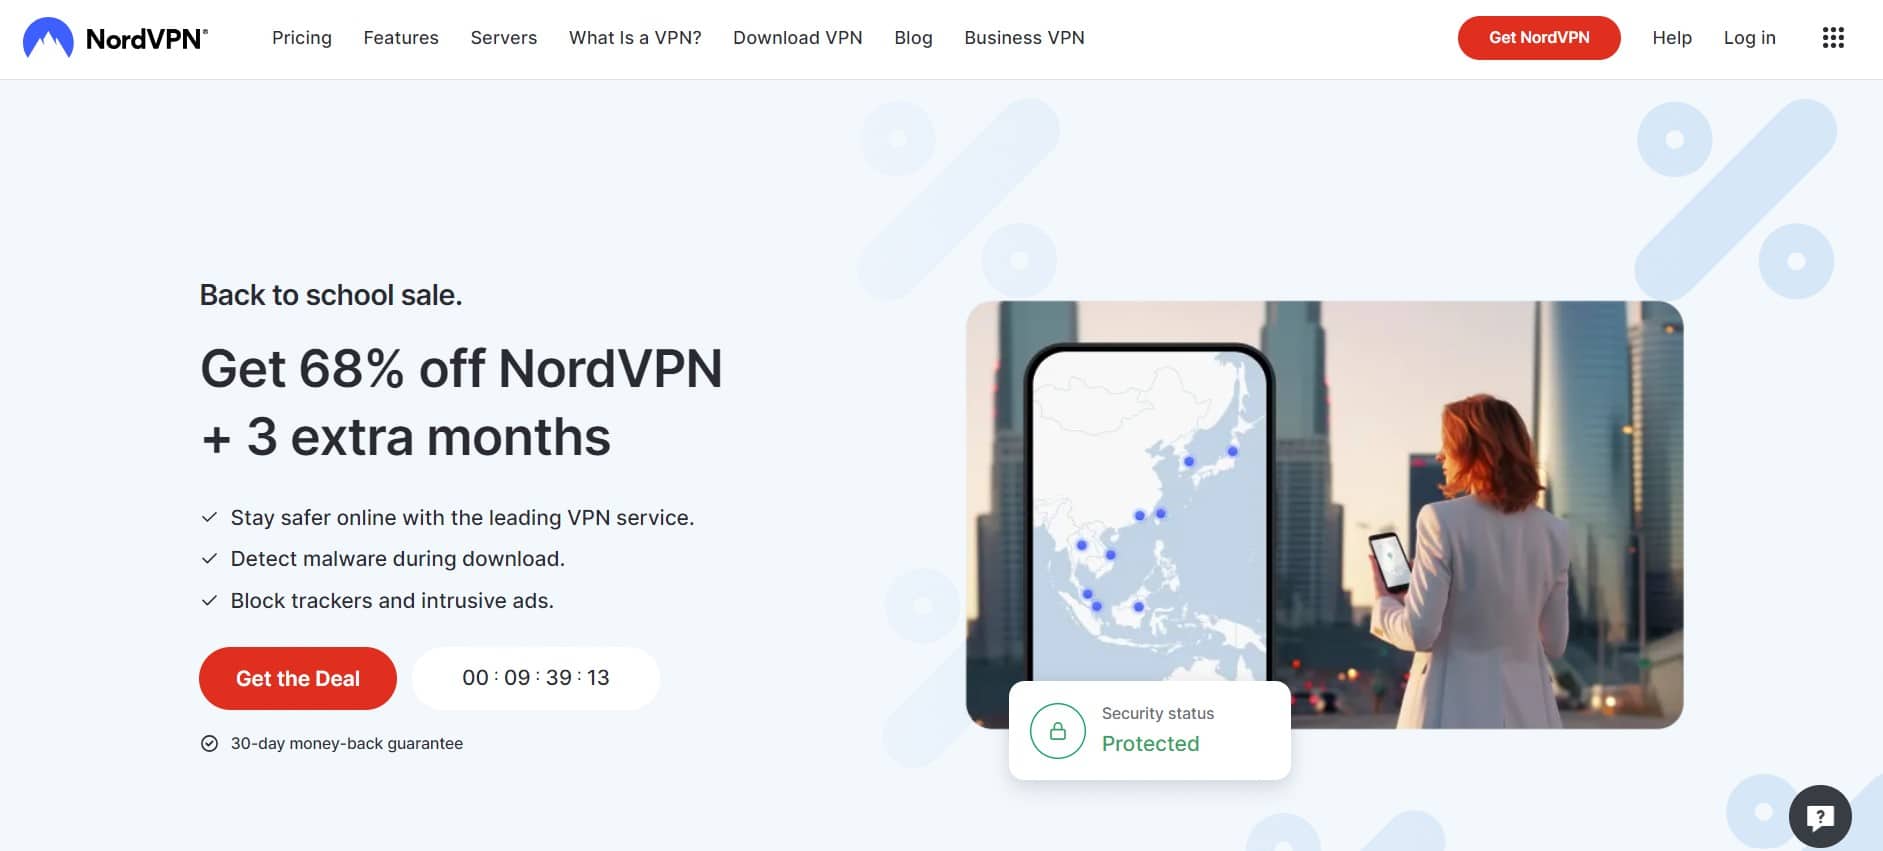 NordVPN Home Page